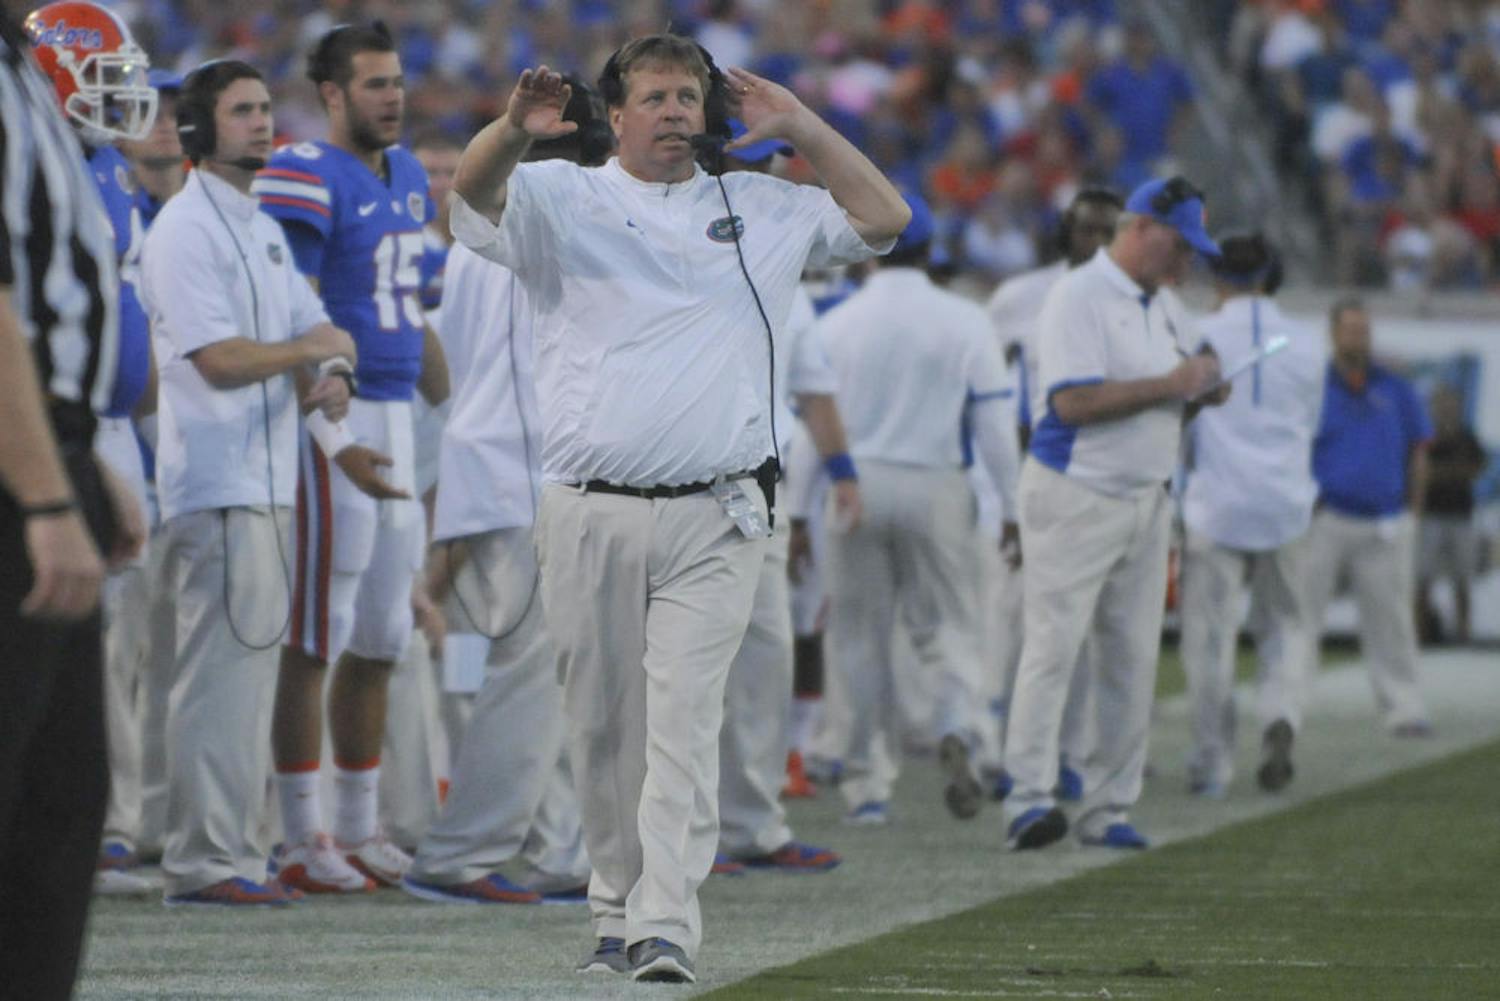 UF football coach Jim McElwain walks down the sideline during Florida's 27-3 win against Georgia on Oct. 31, 2015, at EverBank Field in Jacksonville.